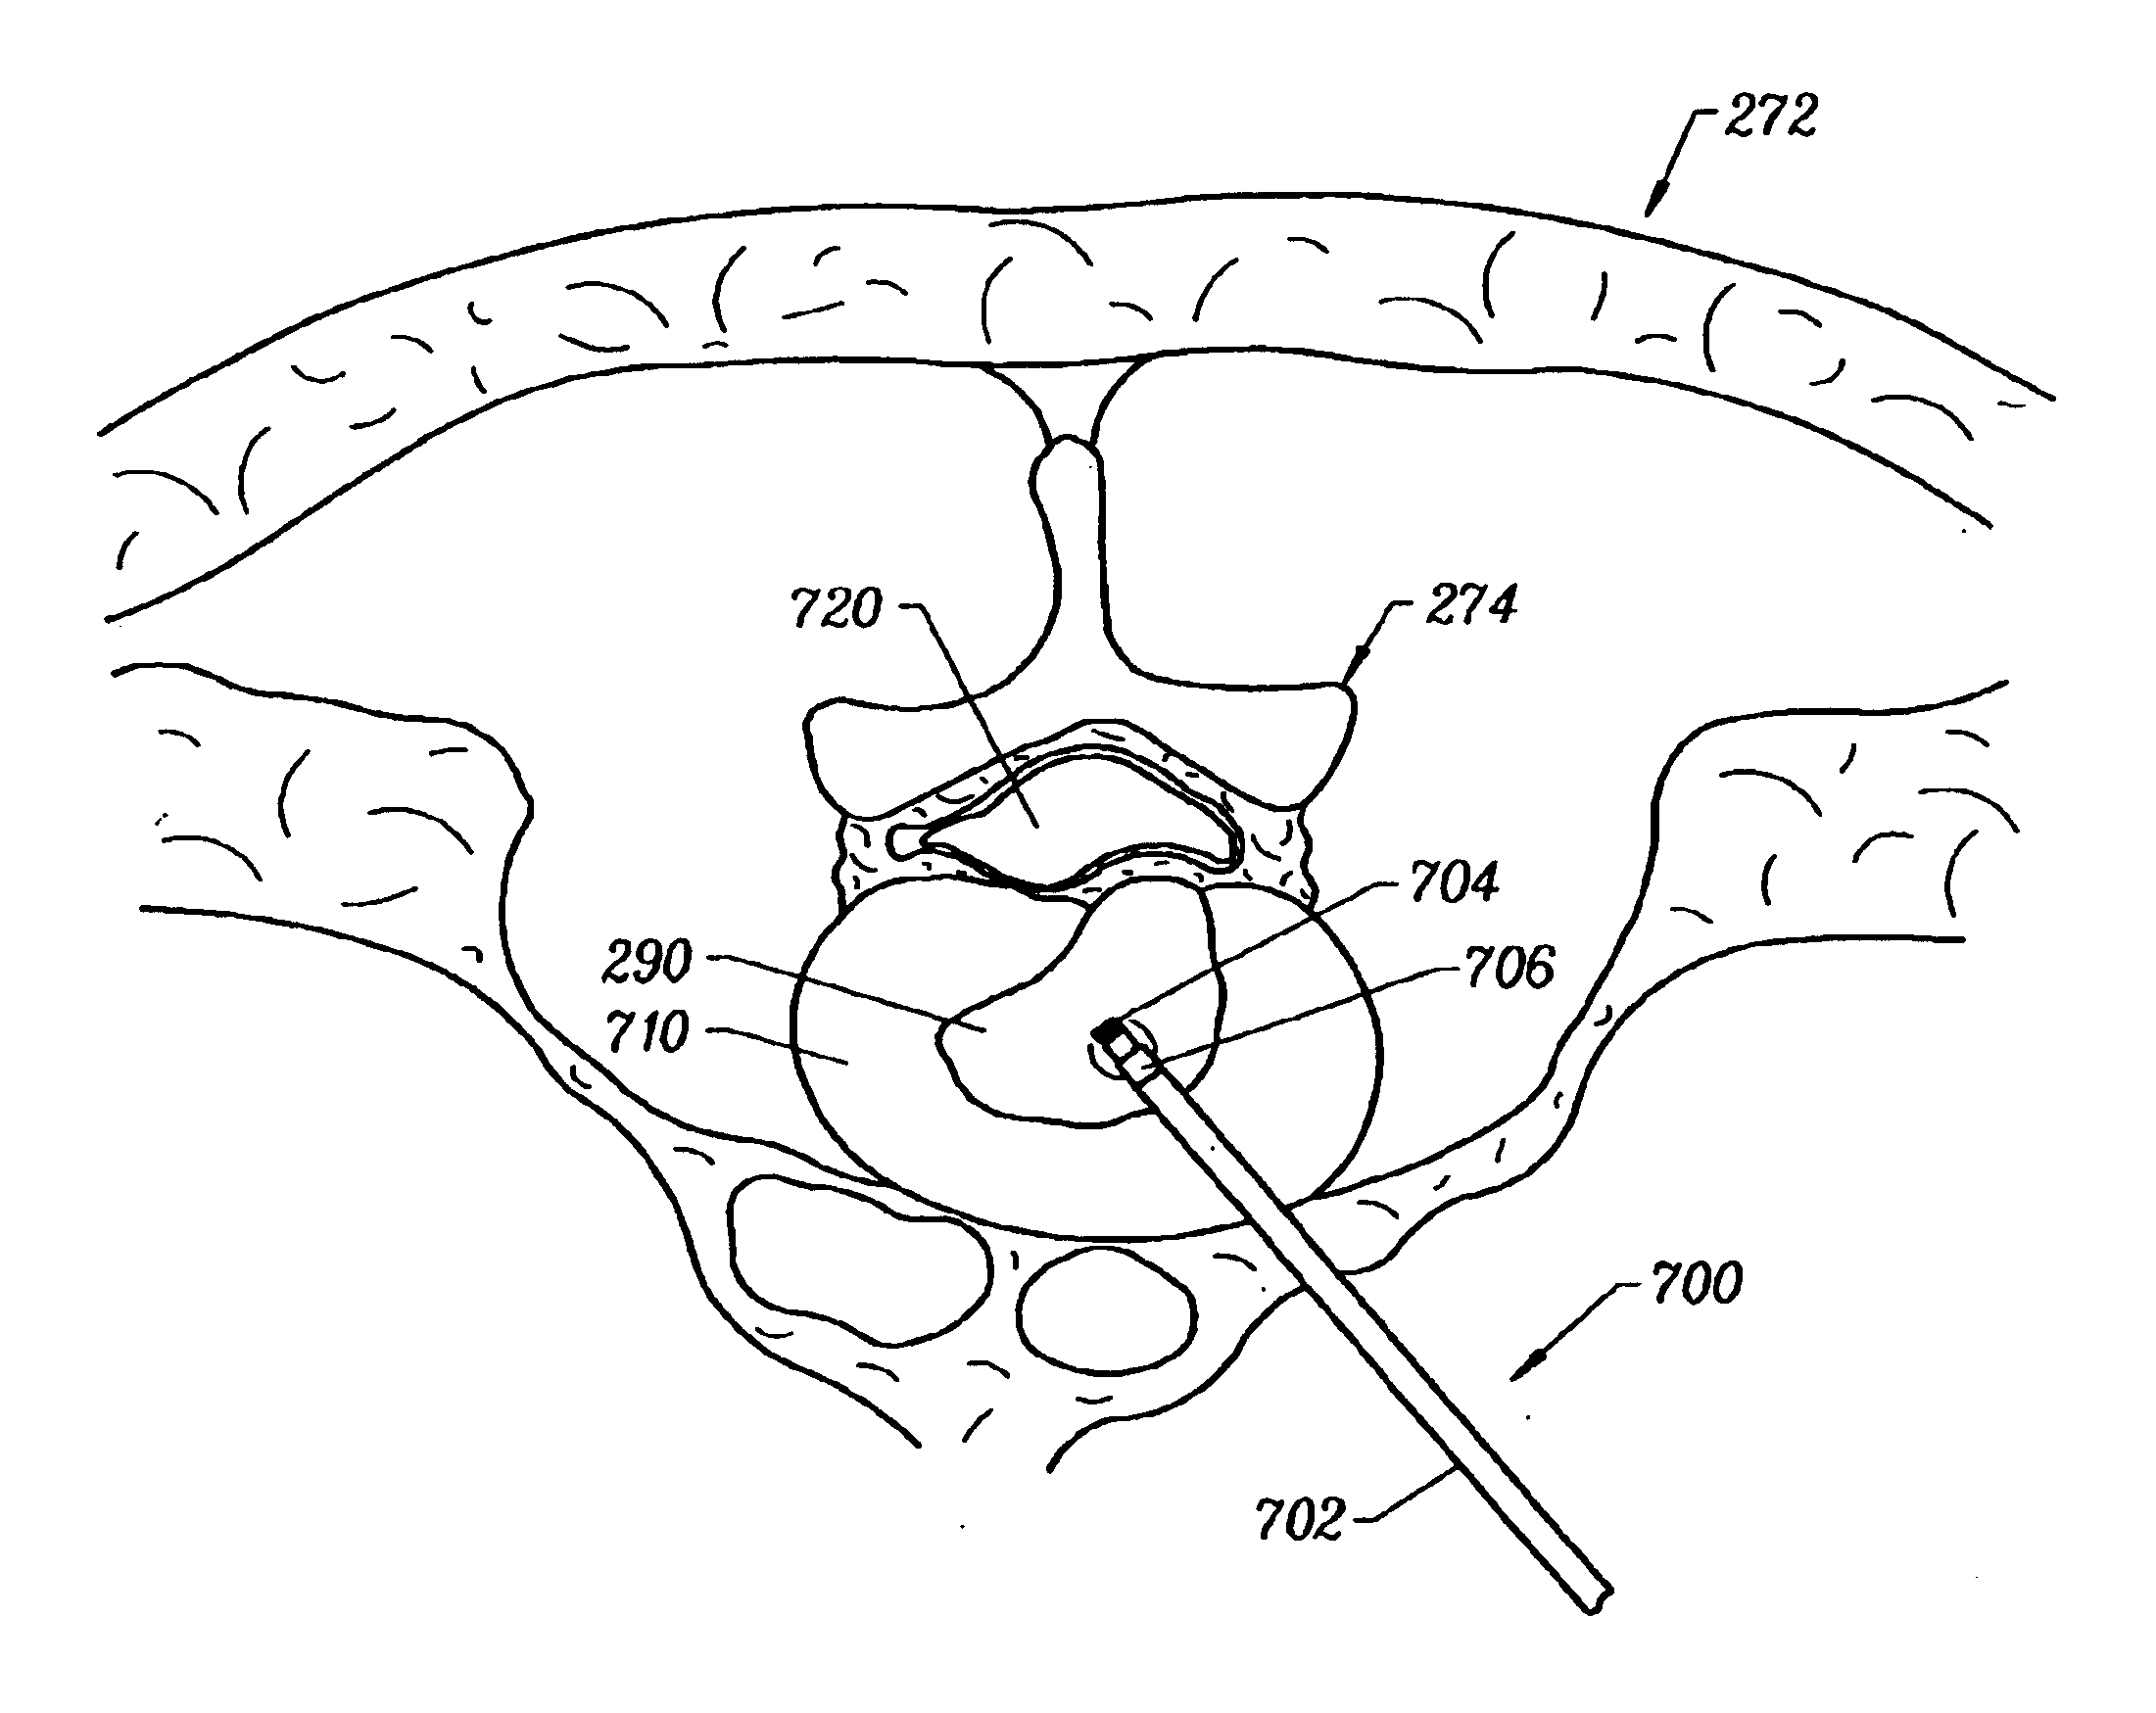 Methods for electrosurgical tissue contraction within the spine